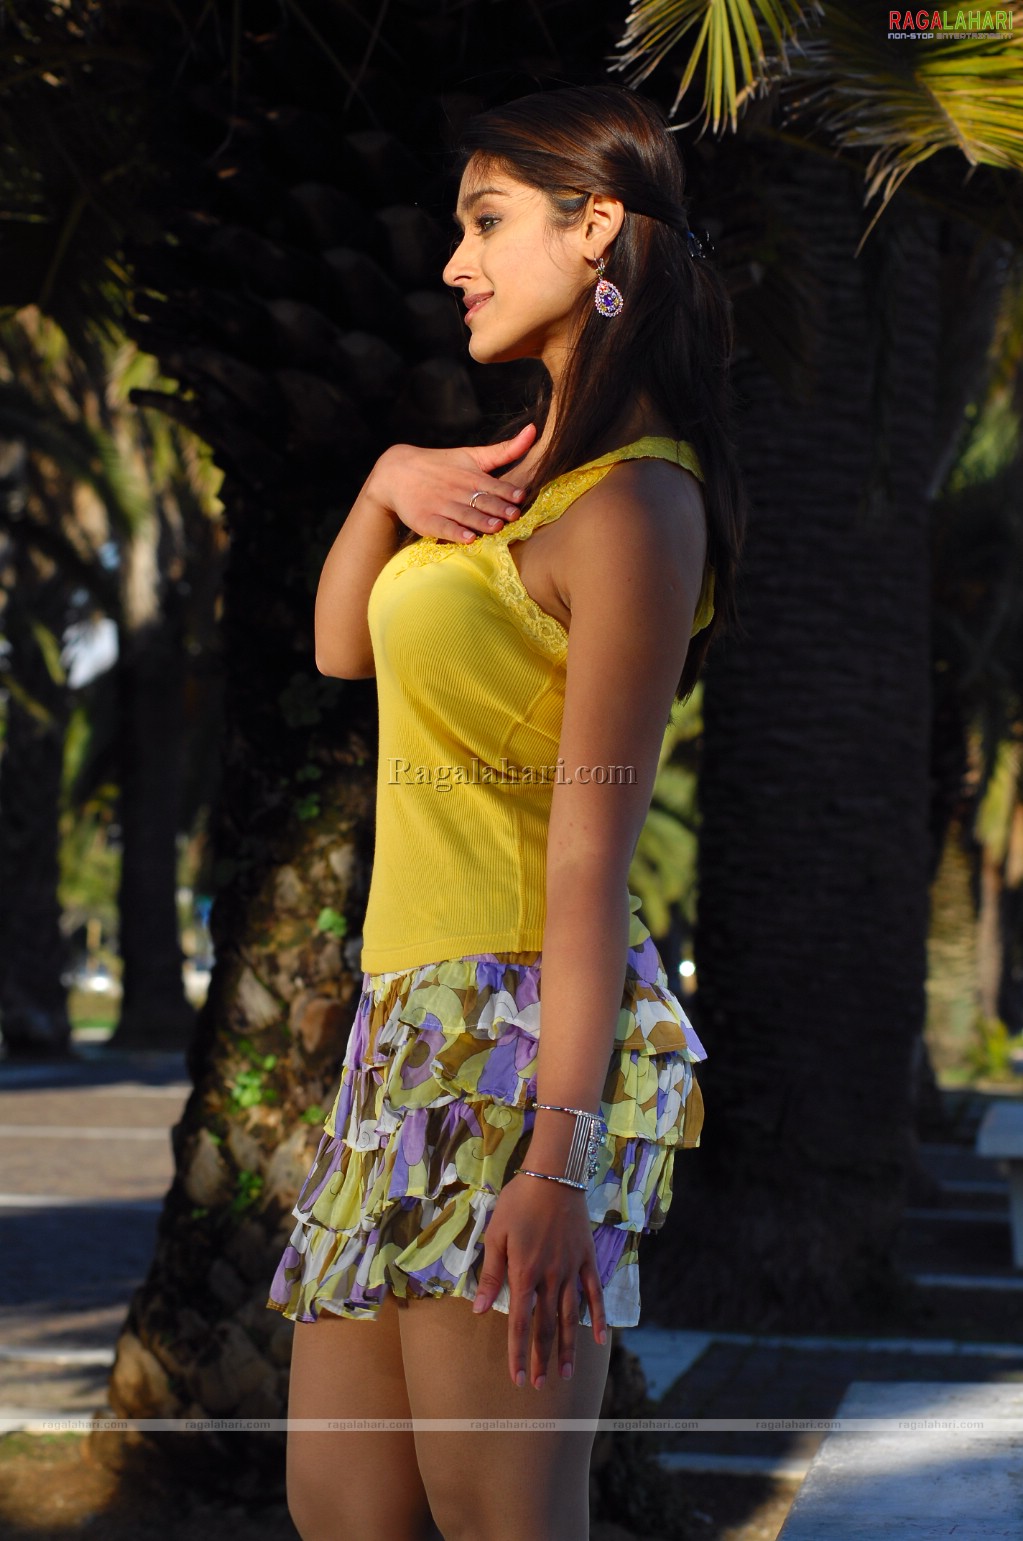 [Cute Actress ILEANA Pictures in Short Skirt]